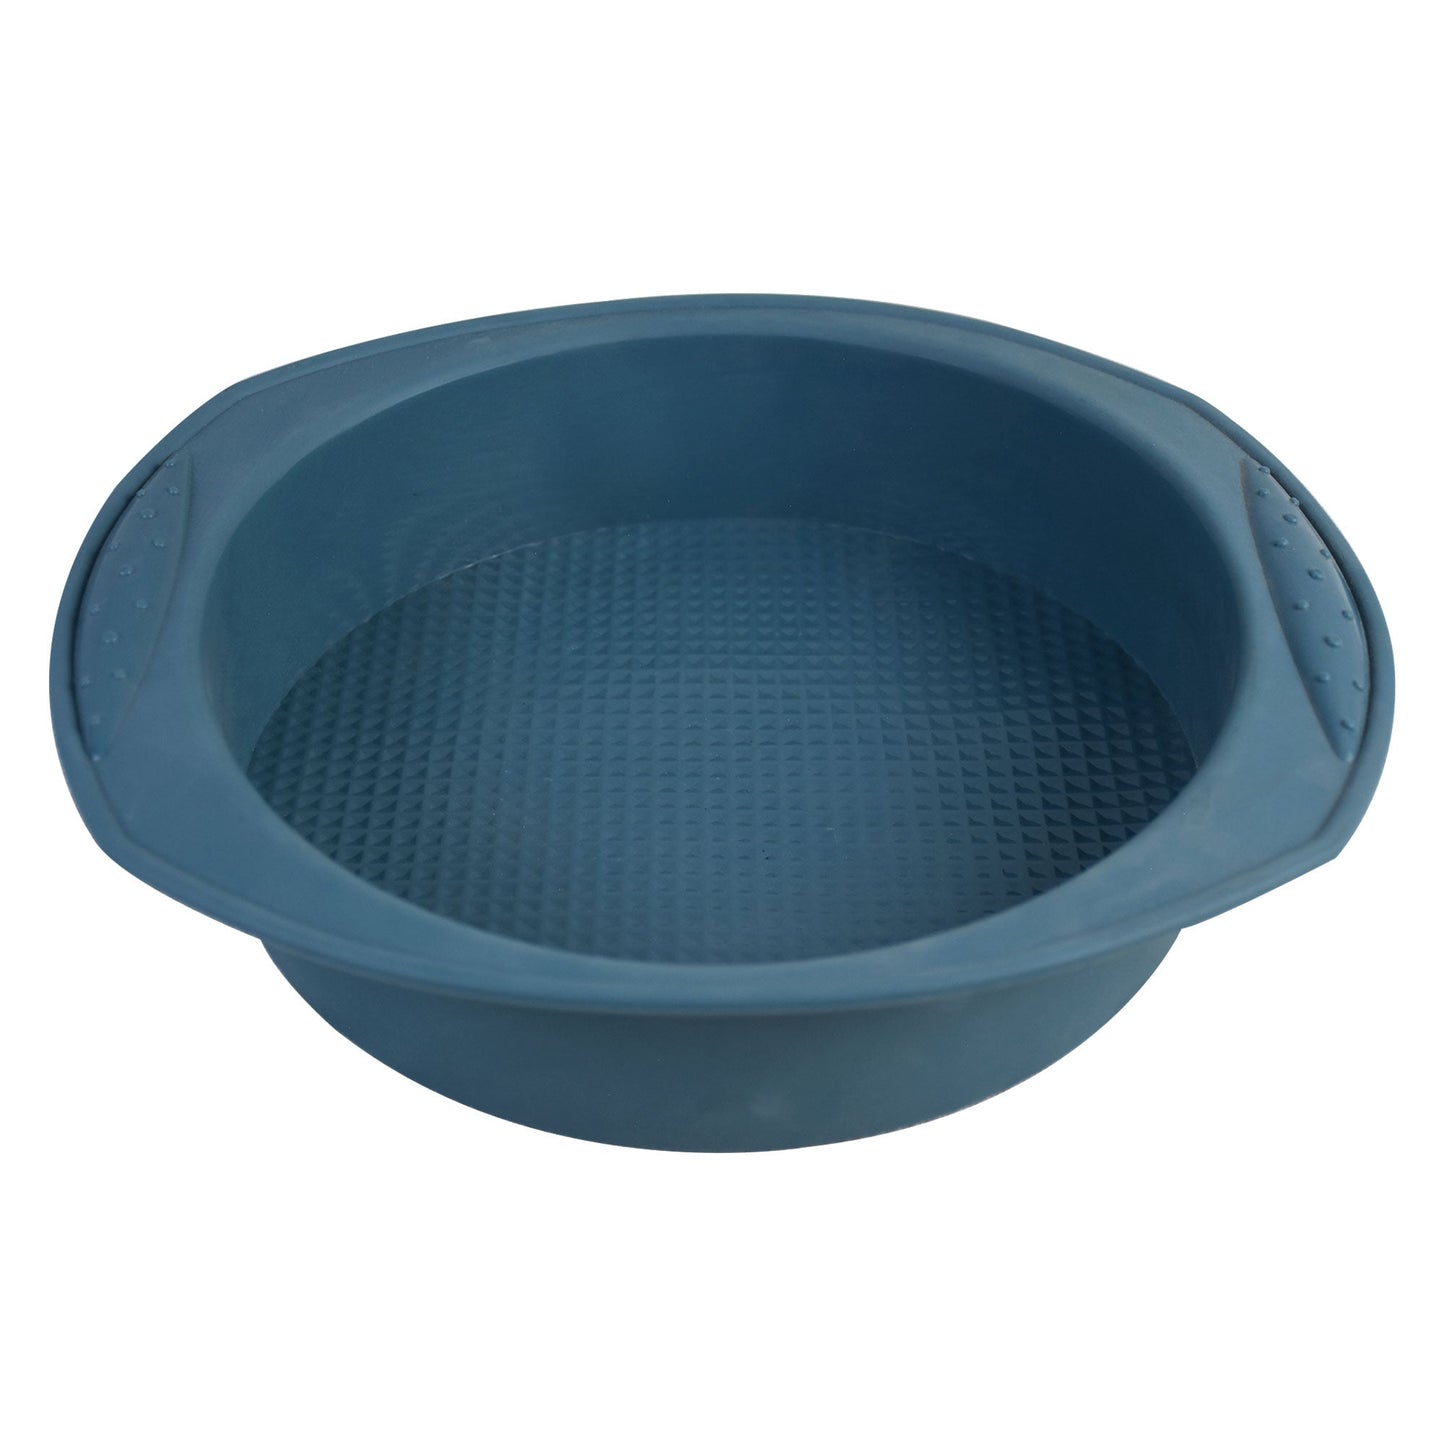 Round Silicone Baking Mold 9 Inch